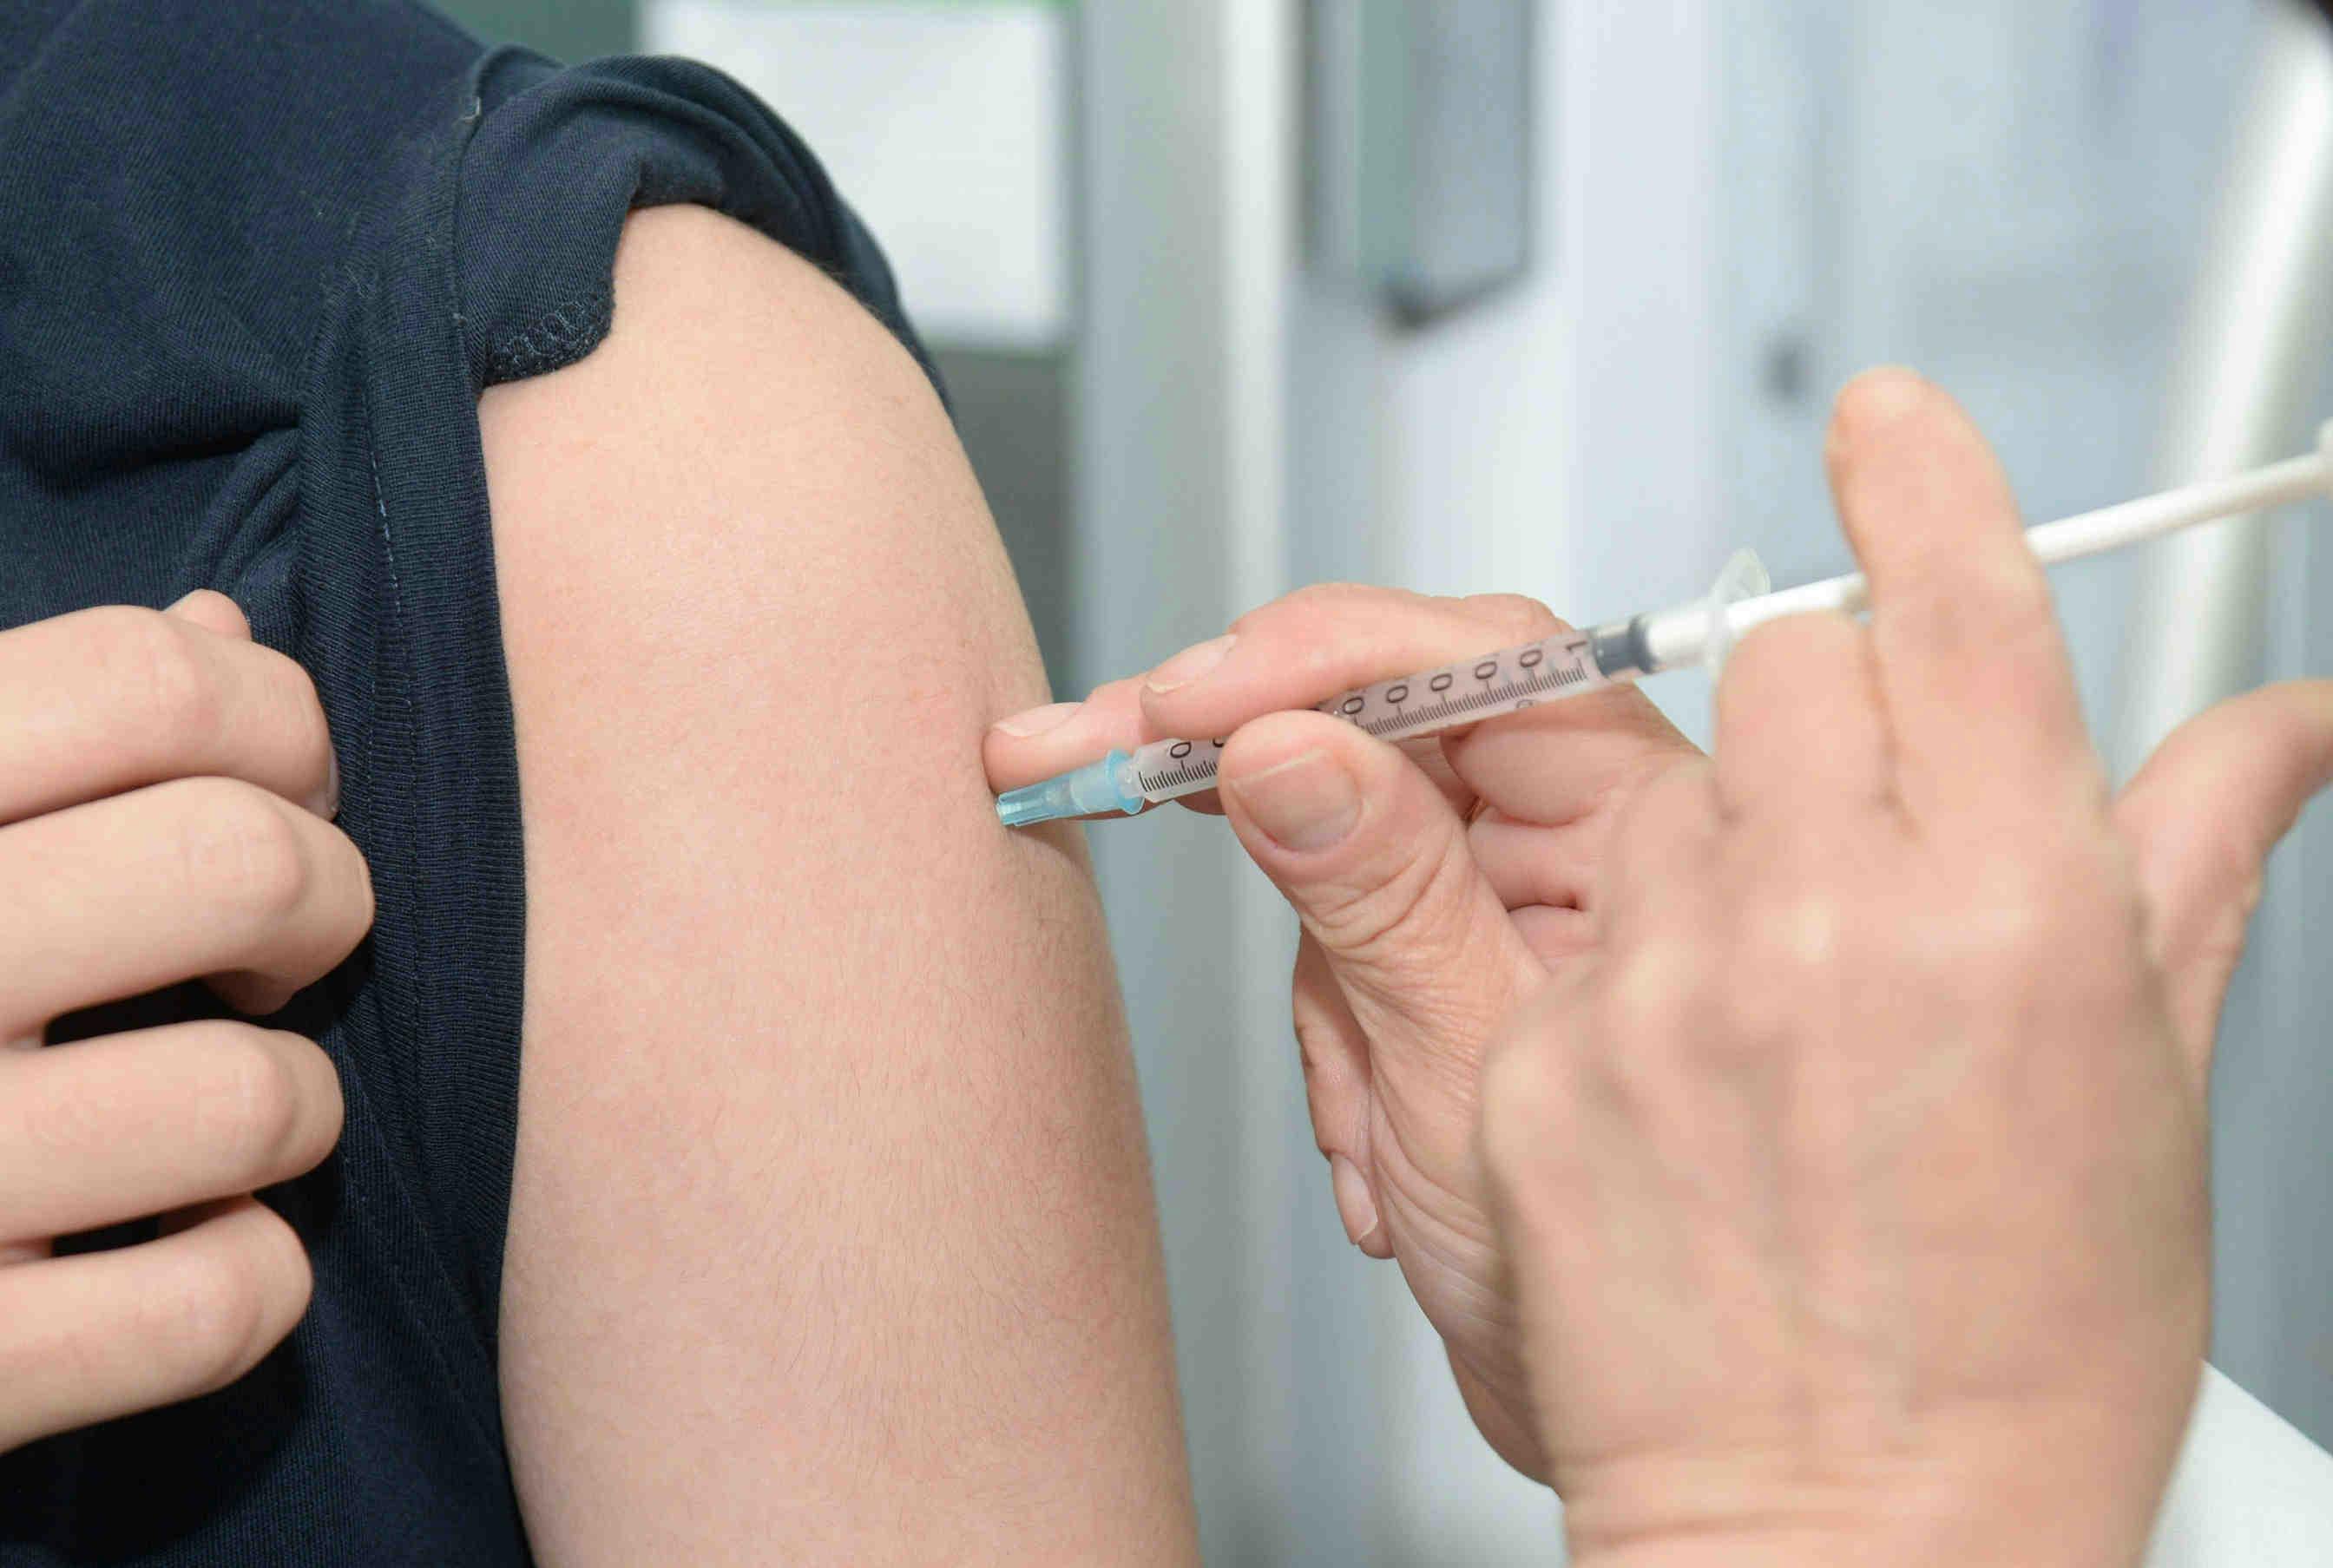 Vaccination on arm